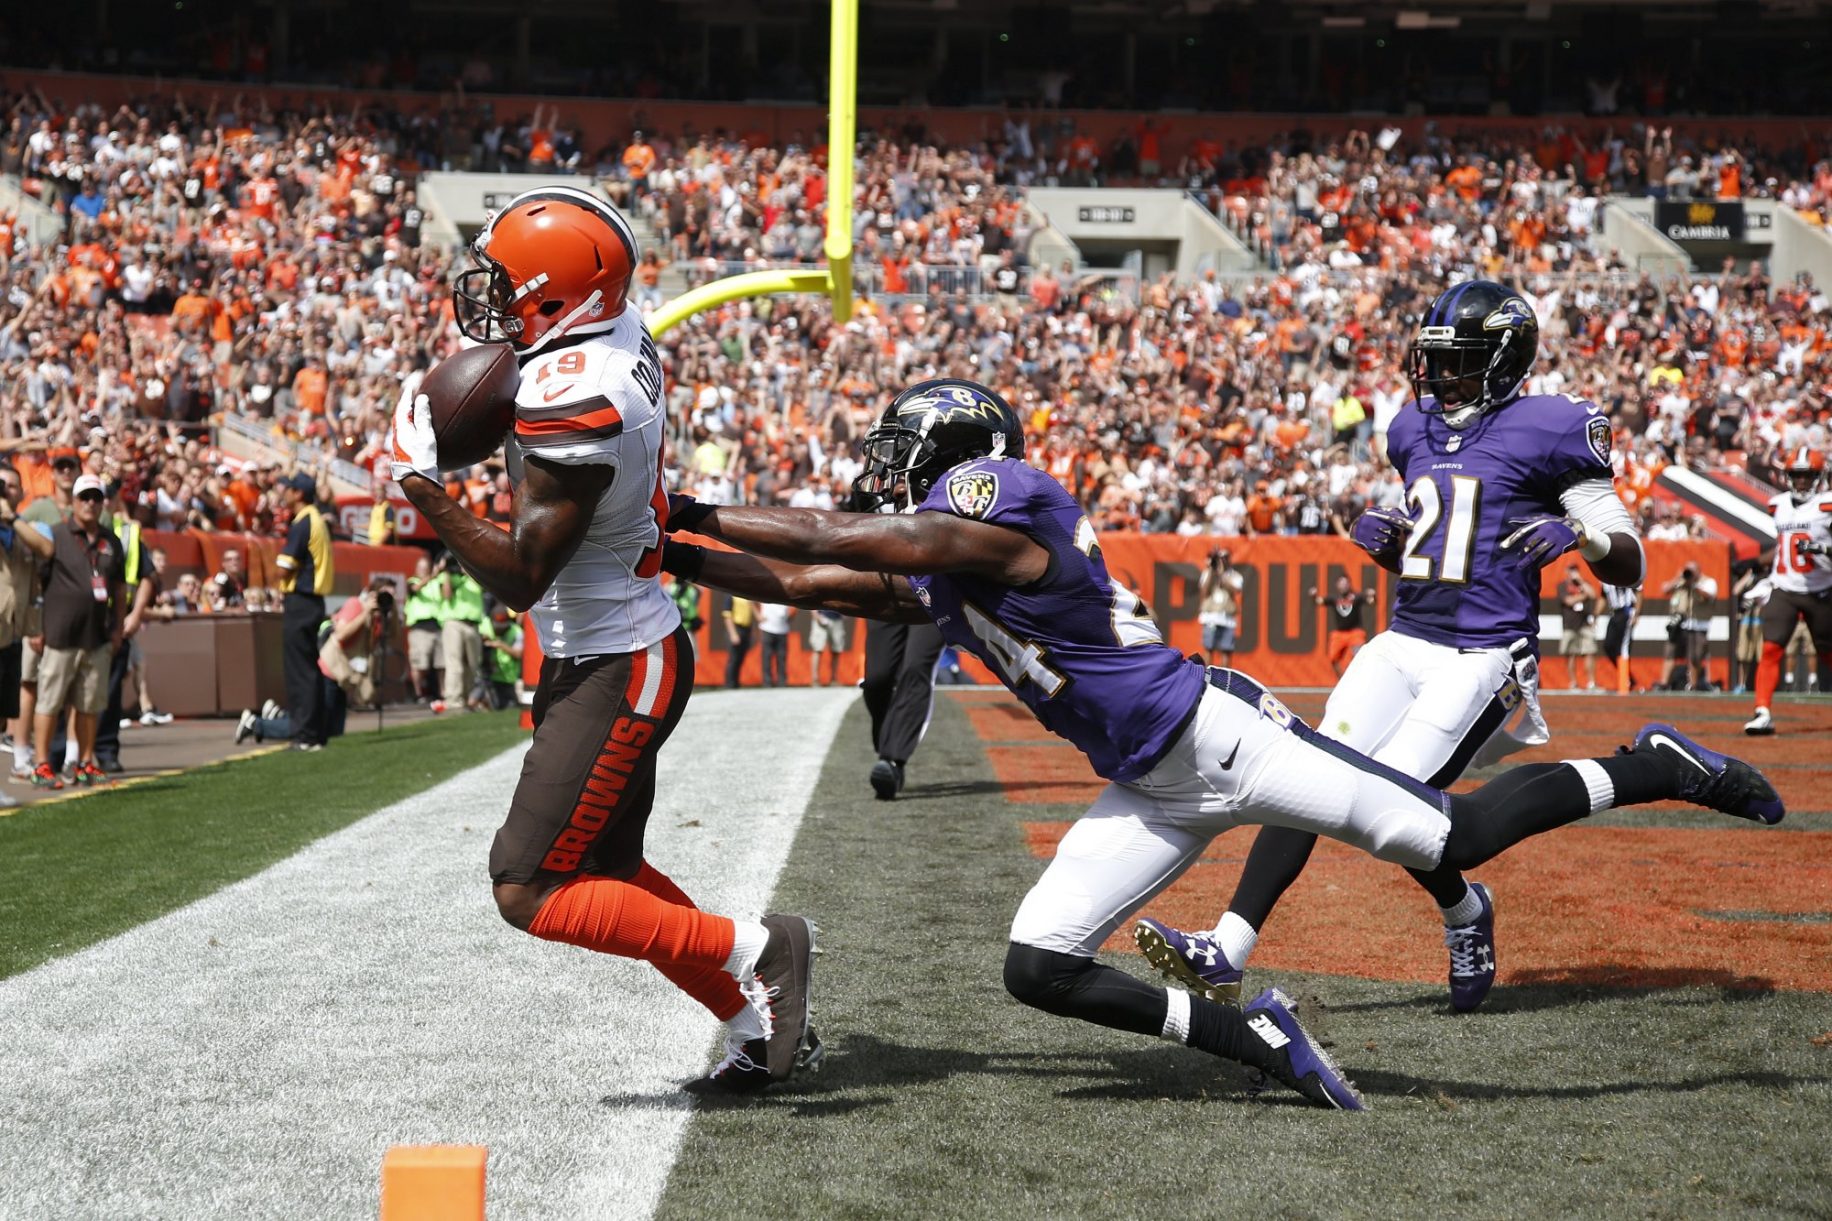 Rookie Browns wide receiver Corey Coleman hauls in a touchdown against the Baltimore Ravens in week 2 of the 2016 season